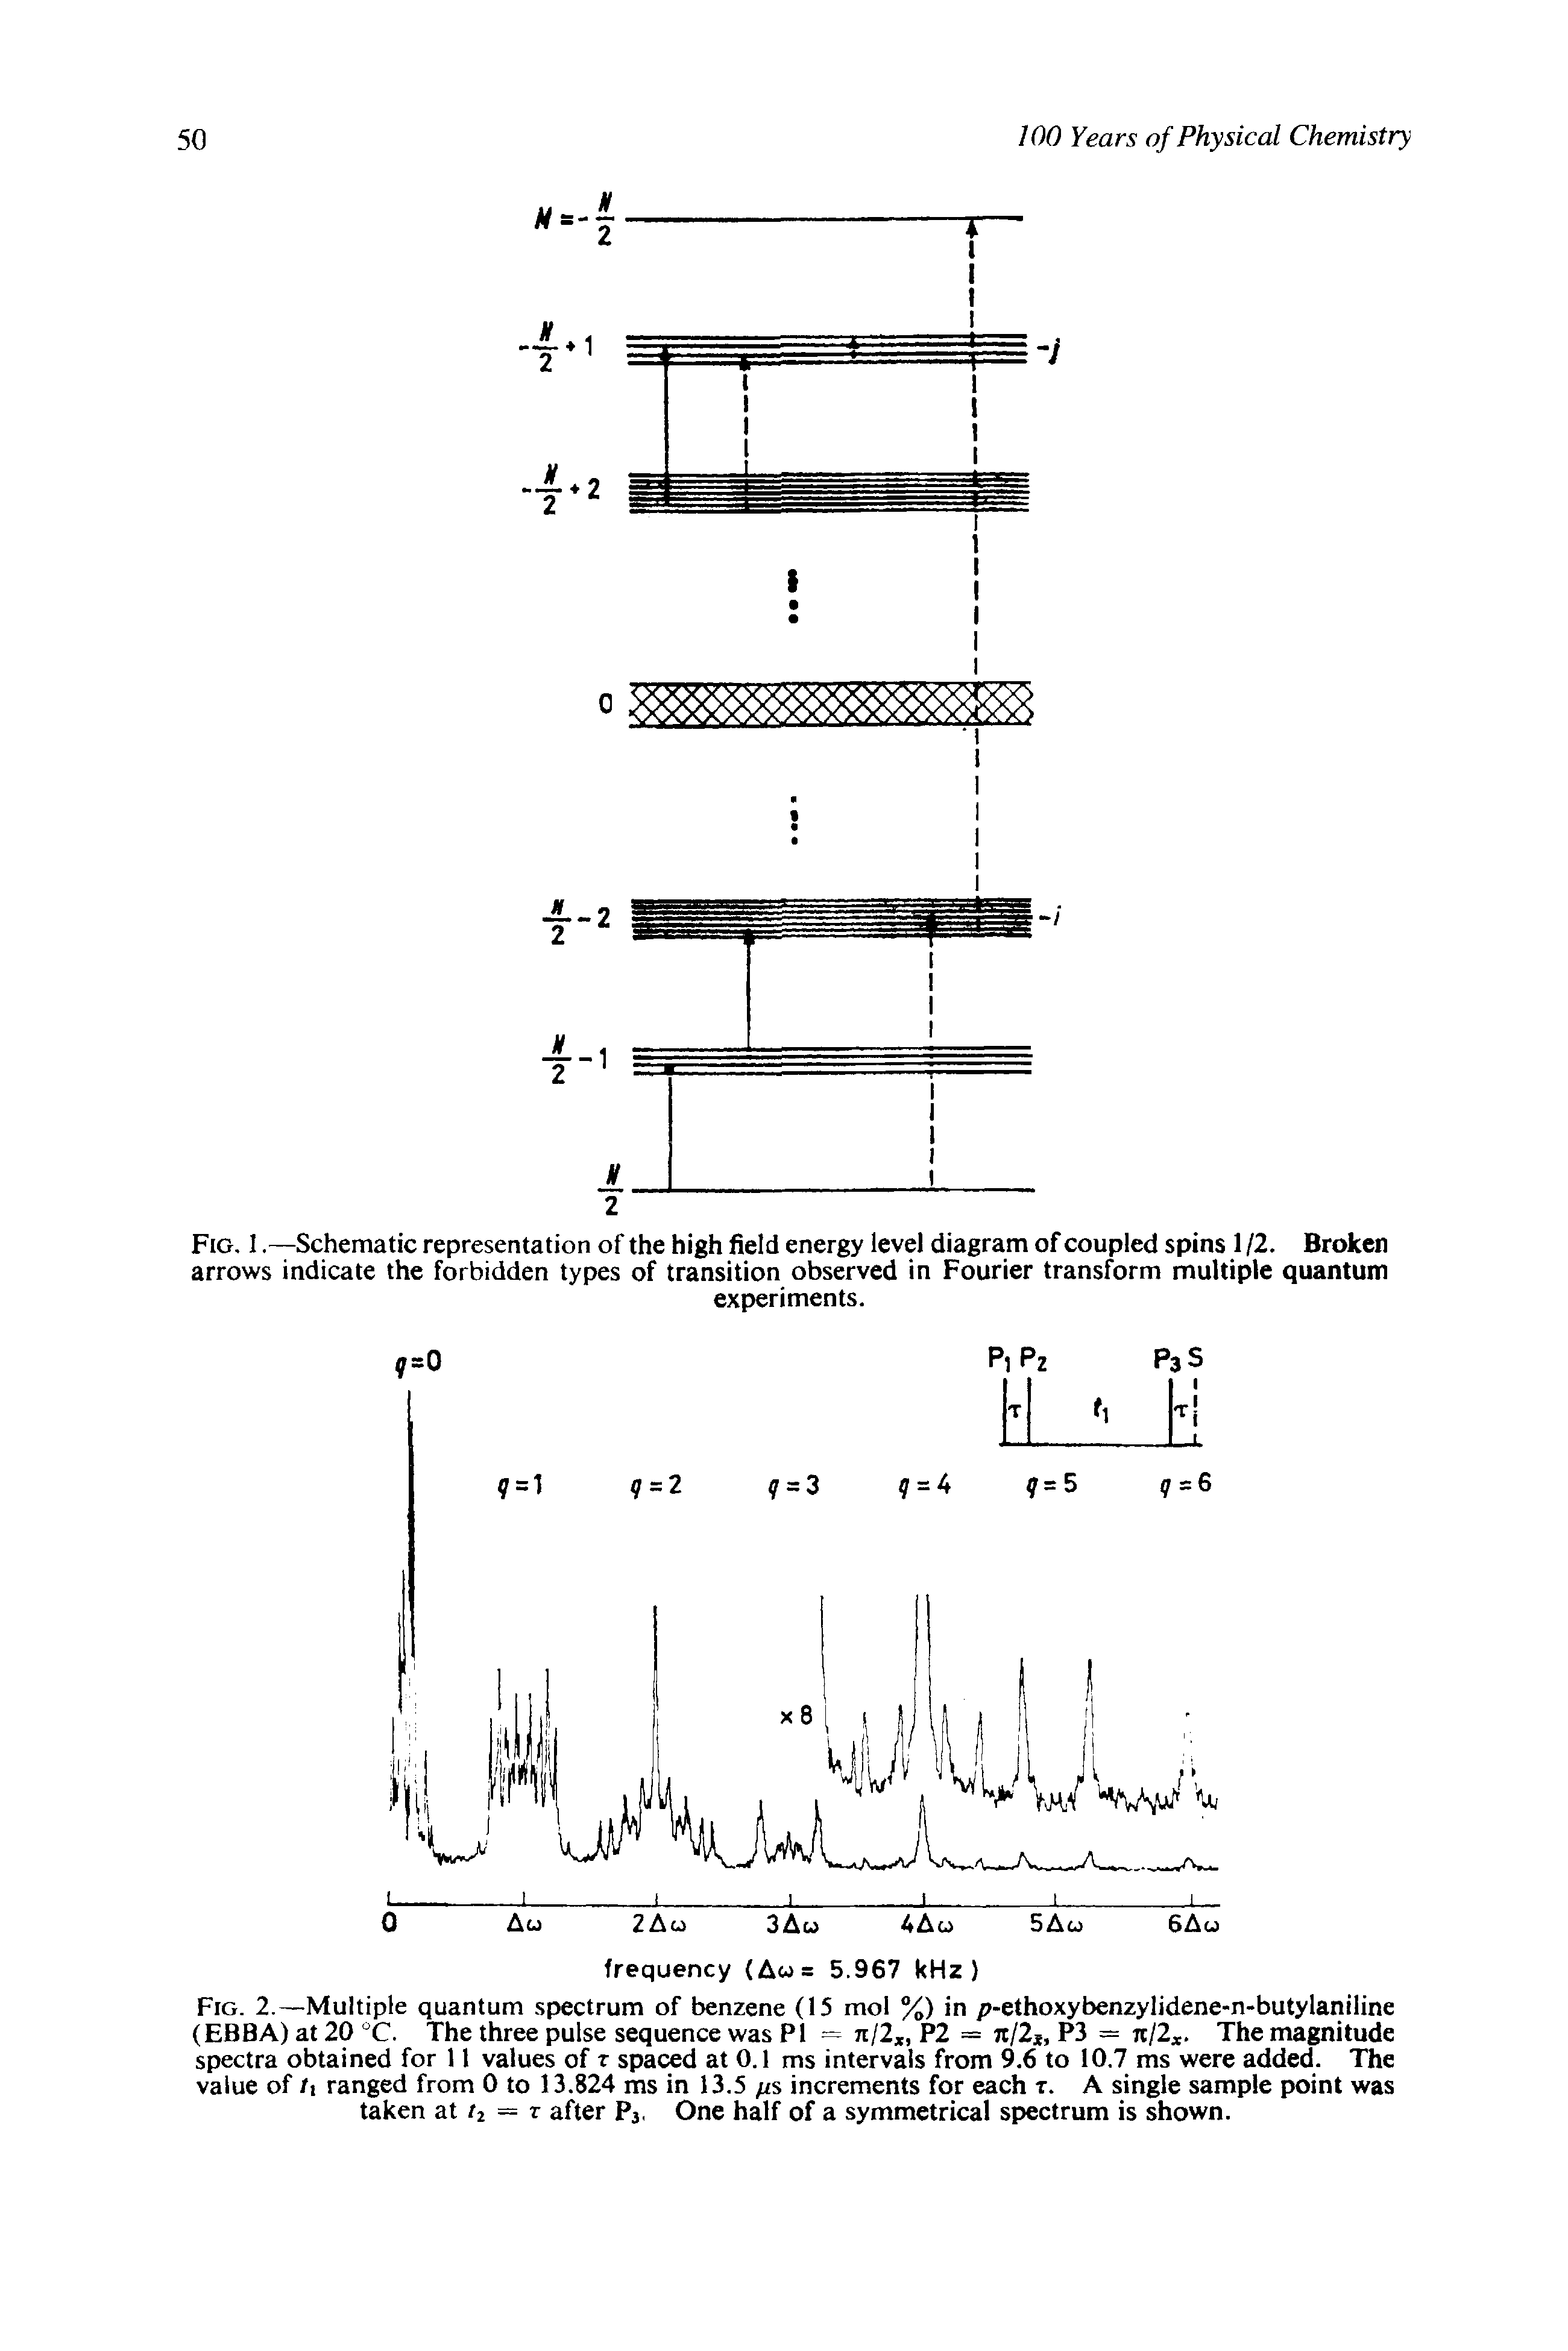 Fig. 2.—Multiple quantum spectrum of benzene (15 mol %) in />-ethoxybenzylidene-n-butylaniline (EBBA) at 20 C. The three pulse sequence was PI = n/2, P2 = 7t/2, P3 = k/2. The magnitude spectra obtained for 11 values of t spaced at 0.1 ms intervals from 9.6 to 10.7 ms were added. The value of /i ranged from 0 to 13.824 ms in 13.5 fis increments for each t. A single sample point was taken at 2 = r after Pj, One half of a symmetrical spectrum is shown.